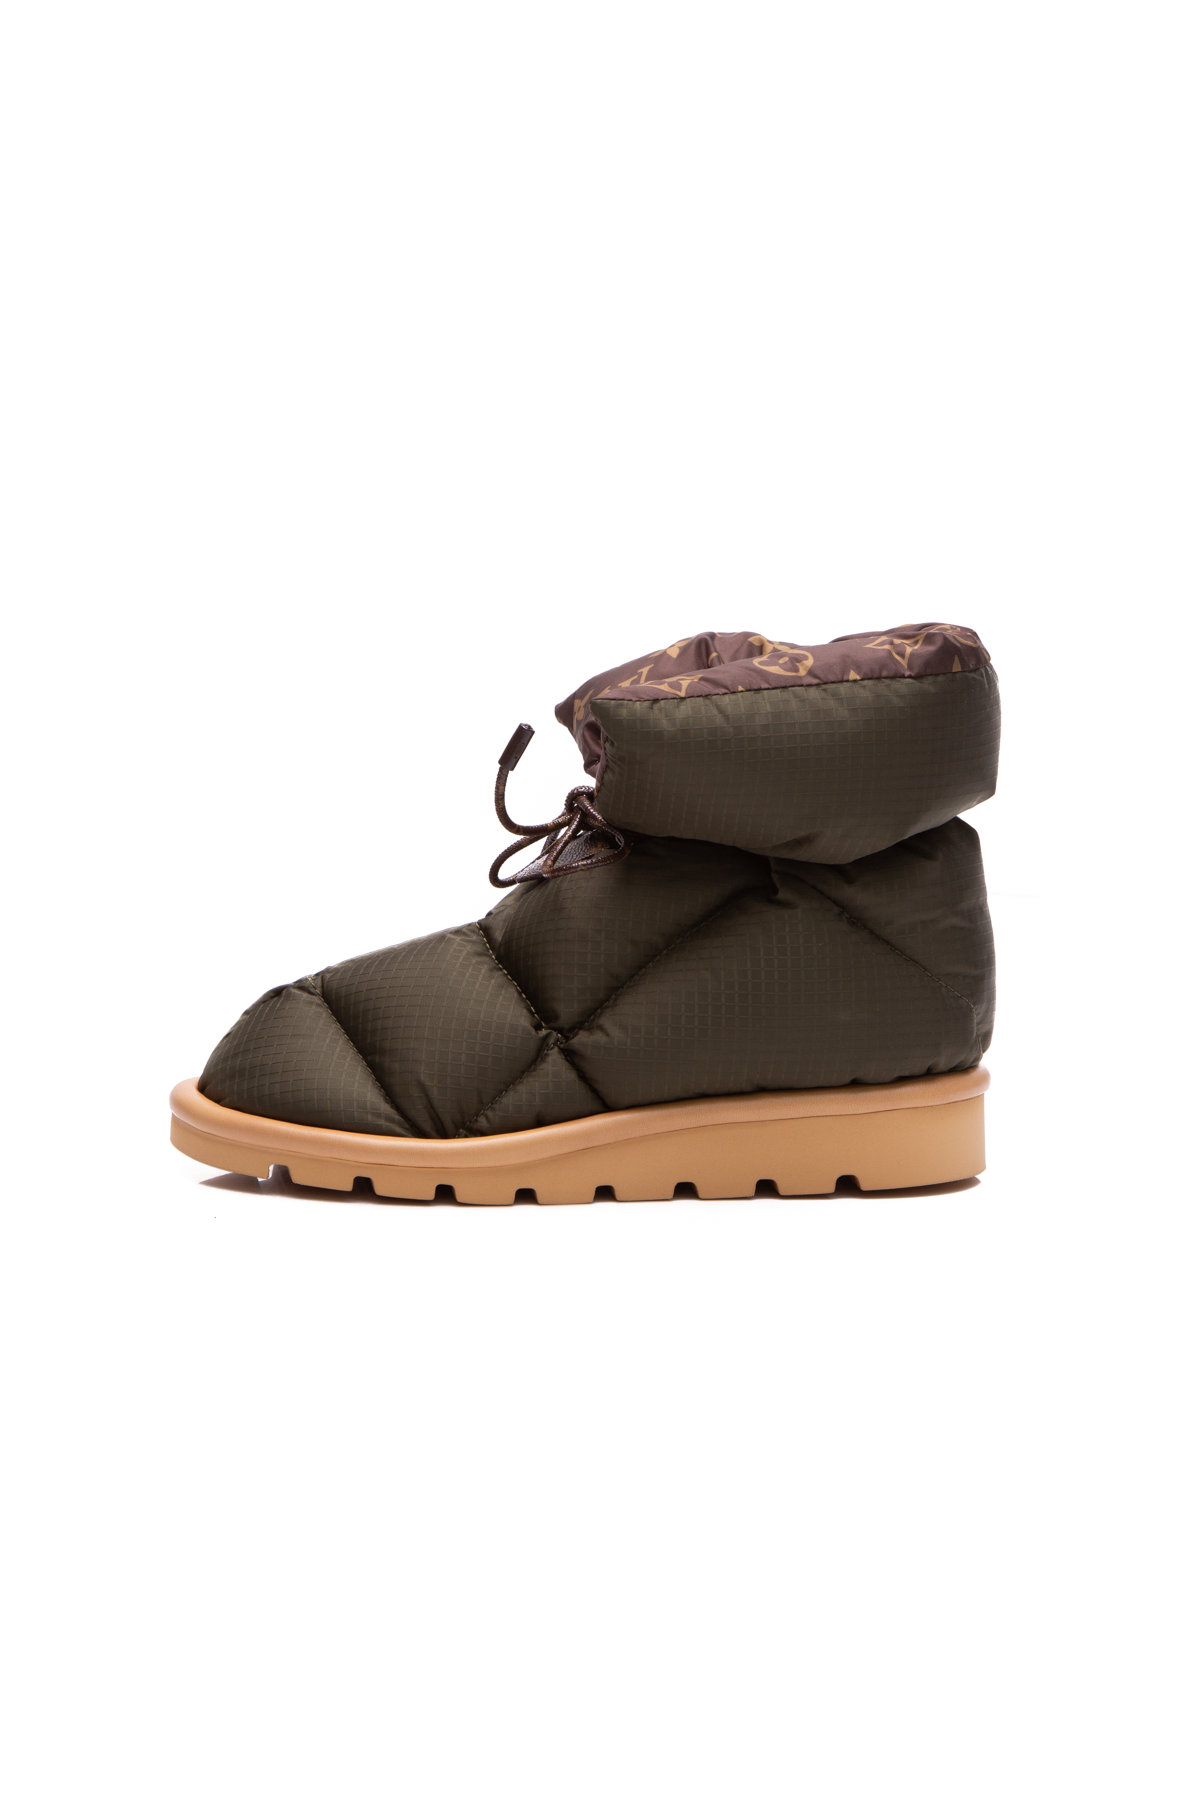 LOUIS VUITTON Shearling Suede Monogram Pillow Comfort Ankle Boot 37 Beige |  FASHIONPHILE